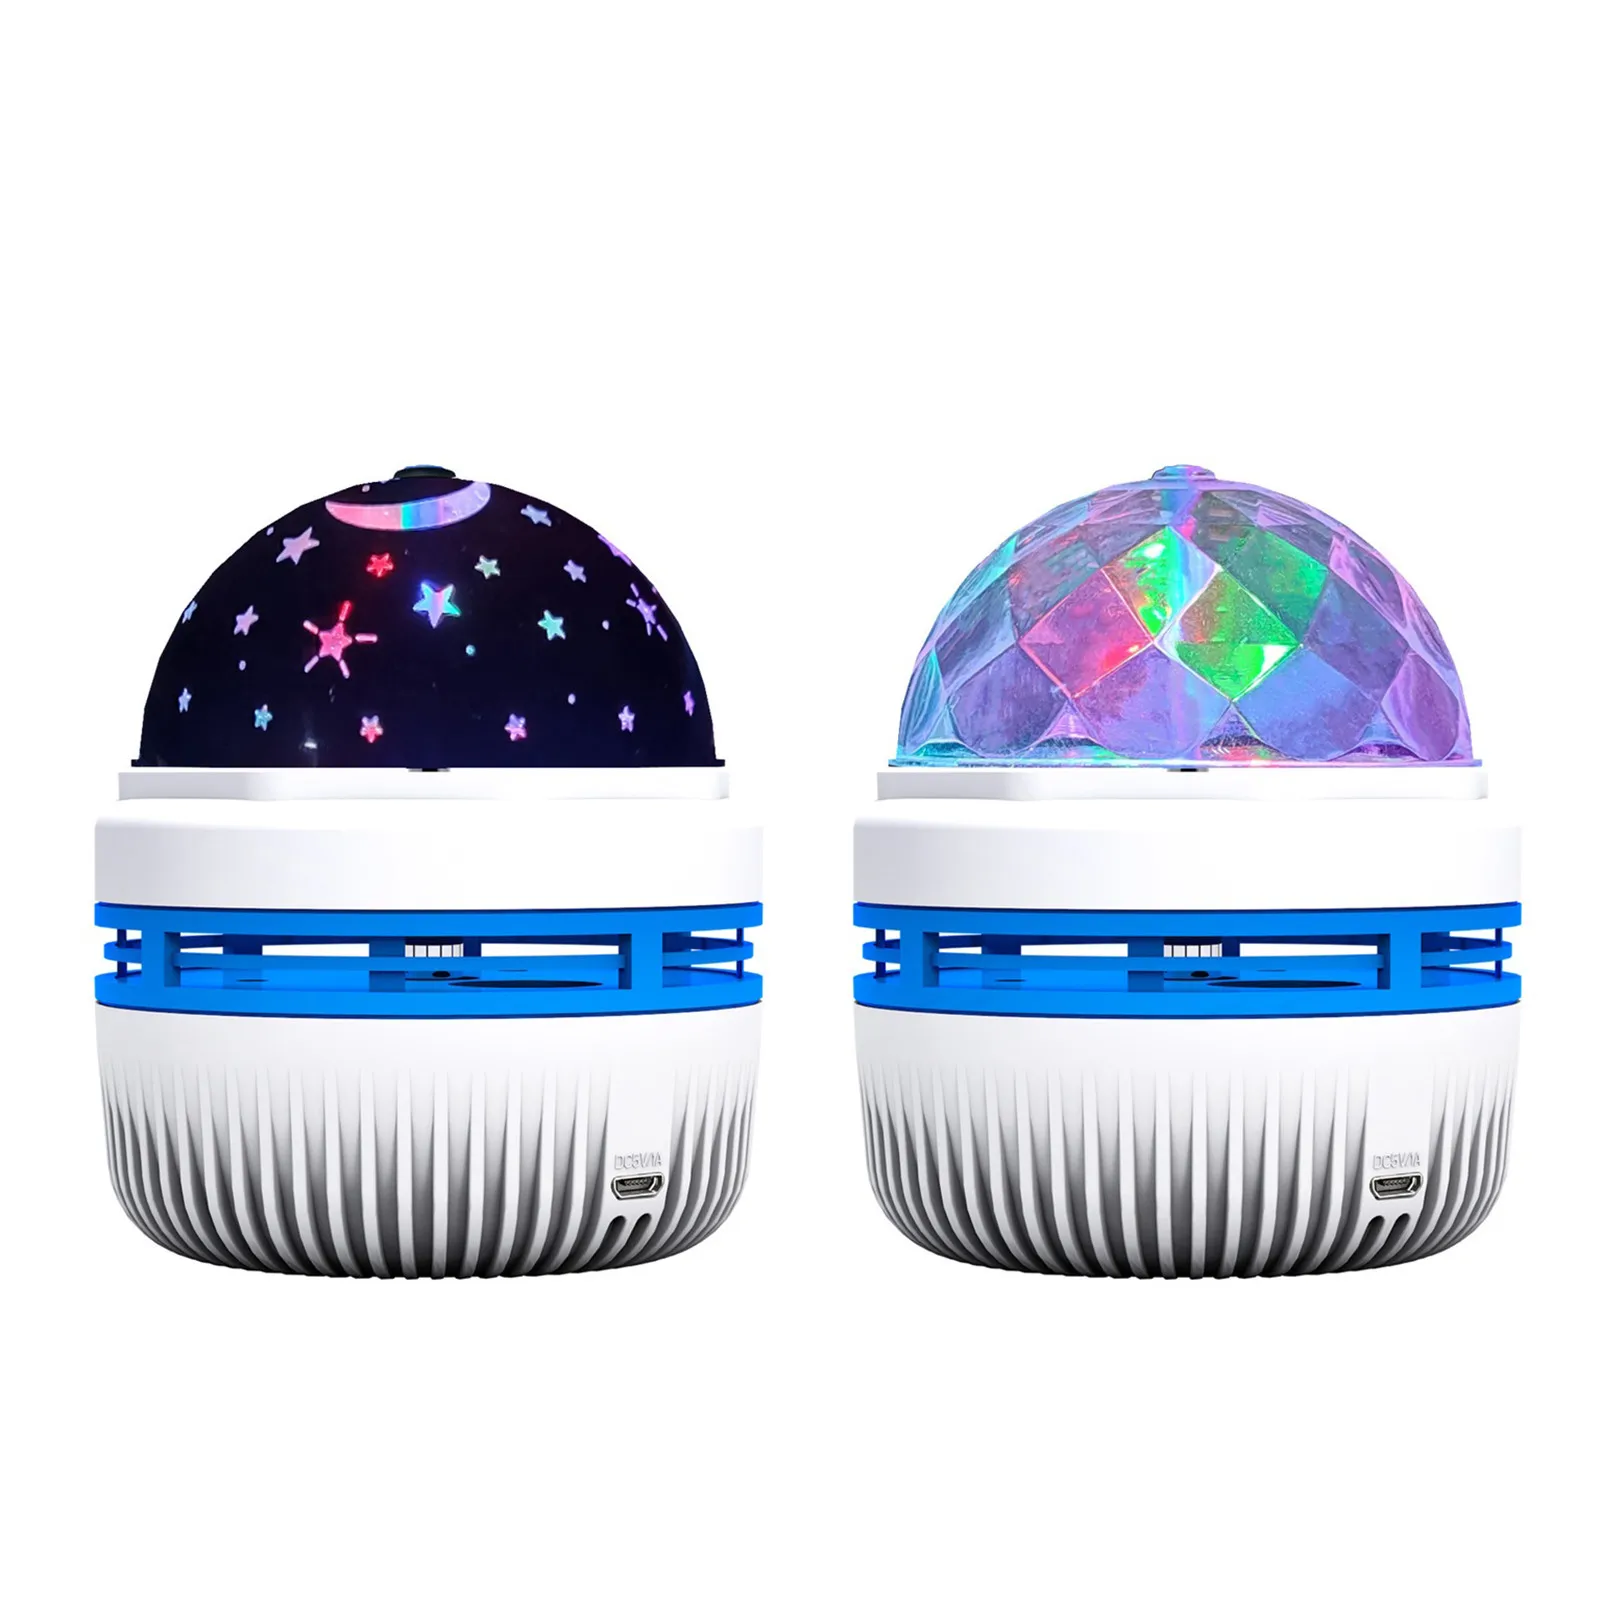 Usb Projection Lamp Magic Ball Light Sky Full Of Sky Projection Lighting Flashing Stage Atmosphere Night Lights For Bedroom wall night light